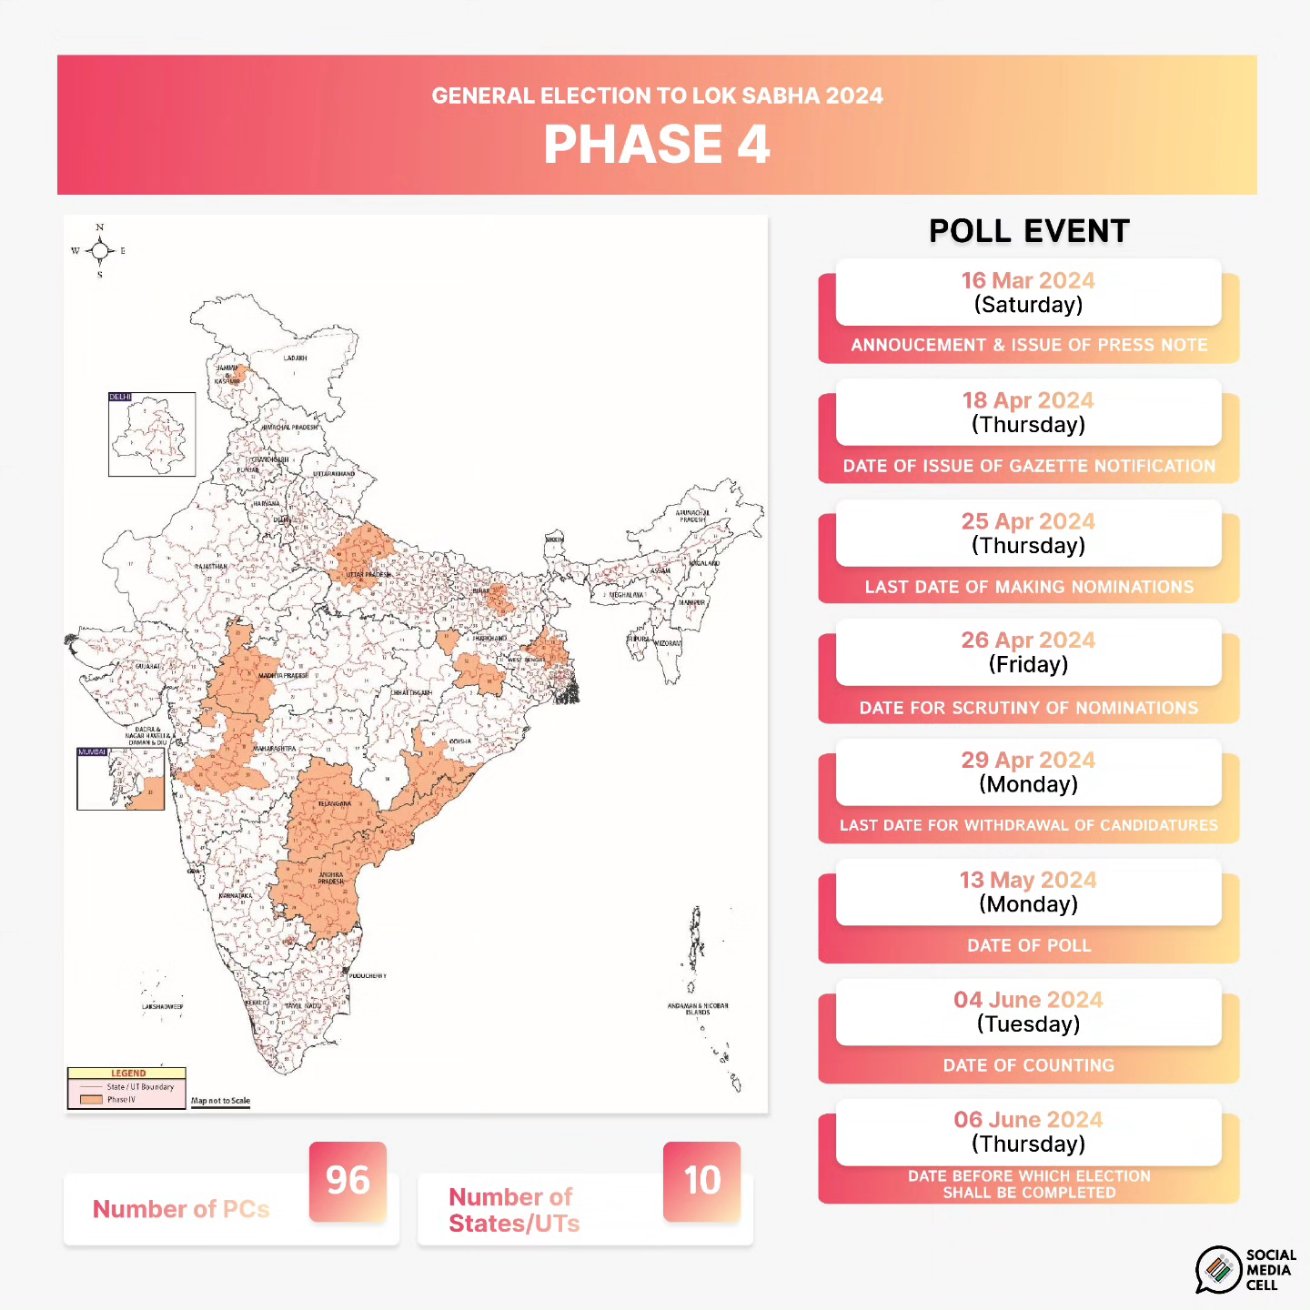 Image 7 Phases Schedule for General Elections in India